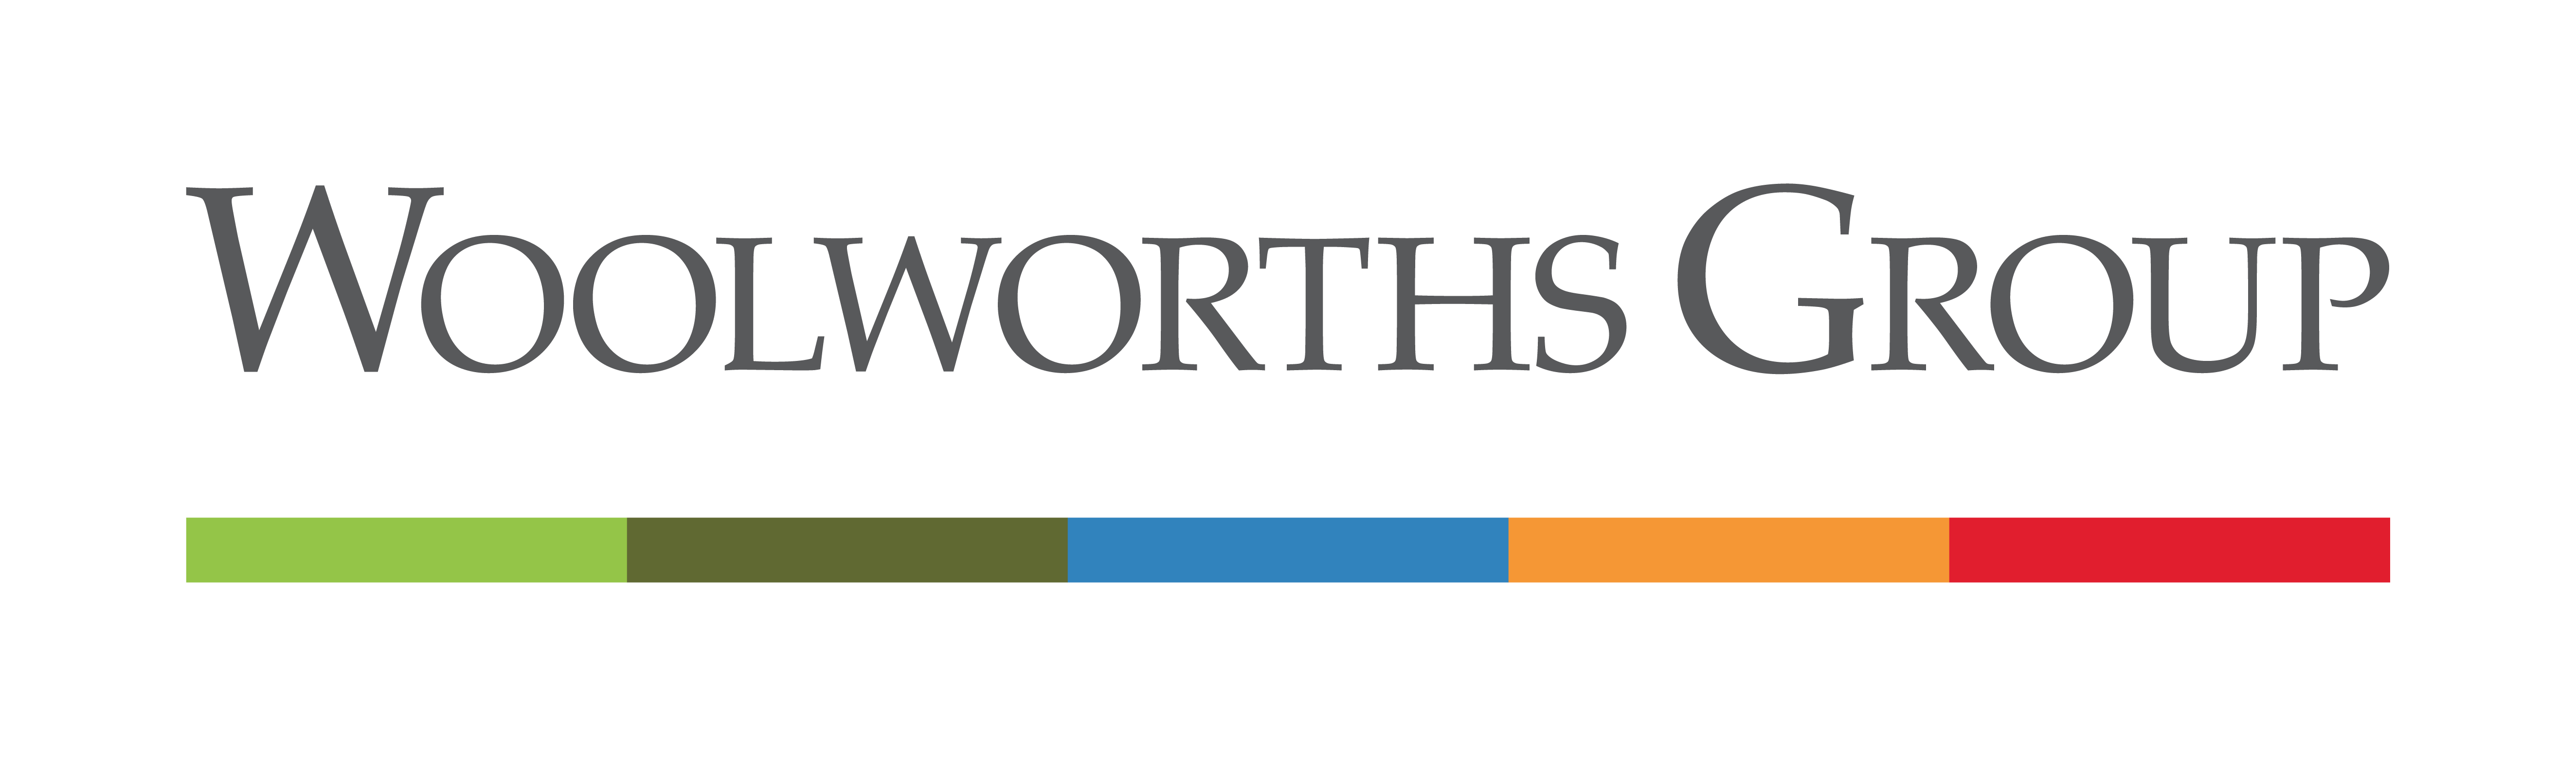 Woolworths Group_RGB_Positive_Logo.png